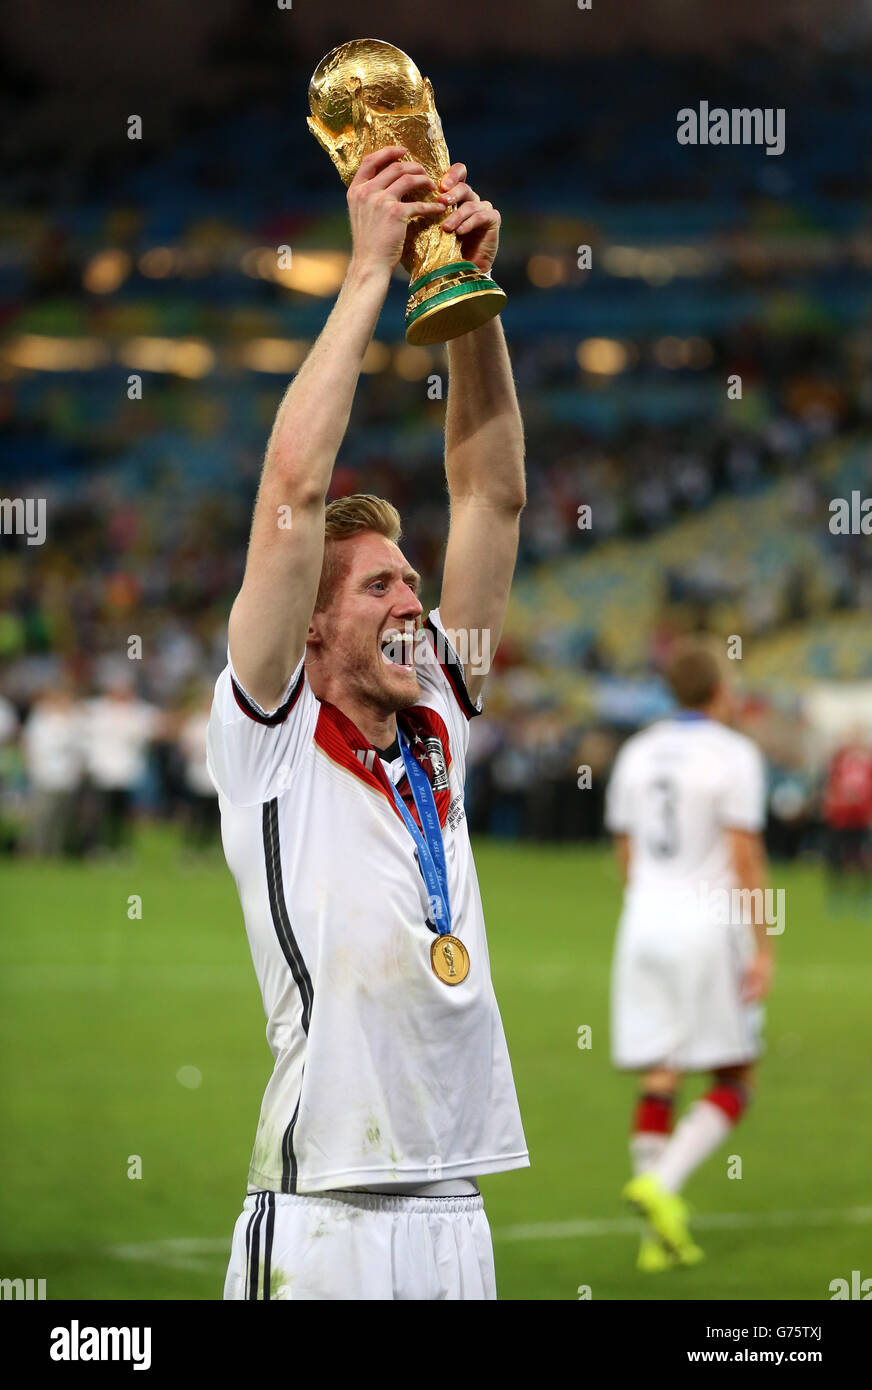 Germany's Andre Schurrle celebrates winning the World Cup after the FIFA World Cup Final at the Estadio do Maracana, Rio de Janerio, Brazil. Stock Photo